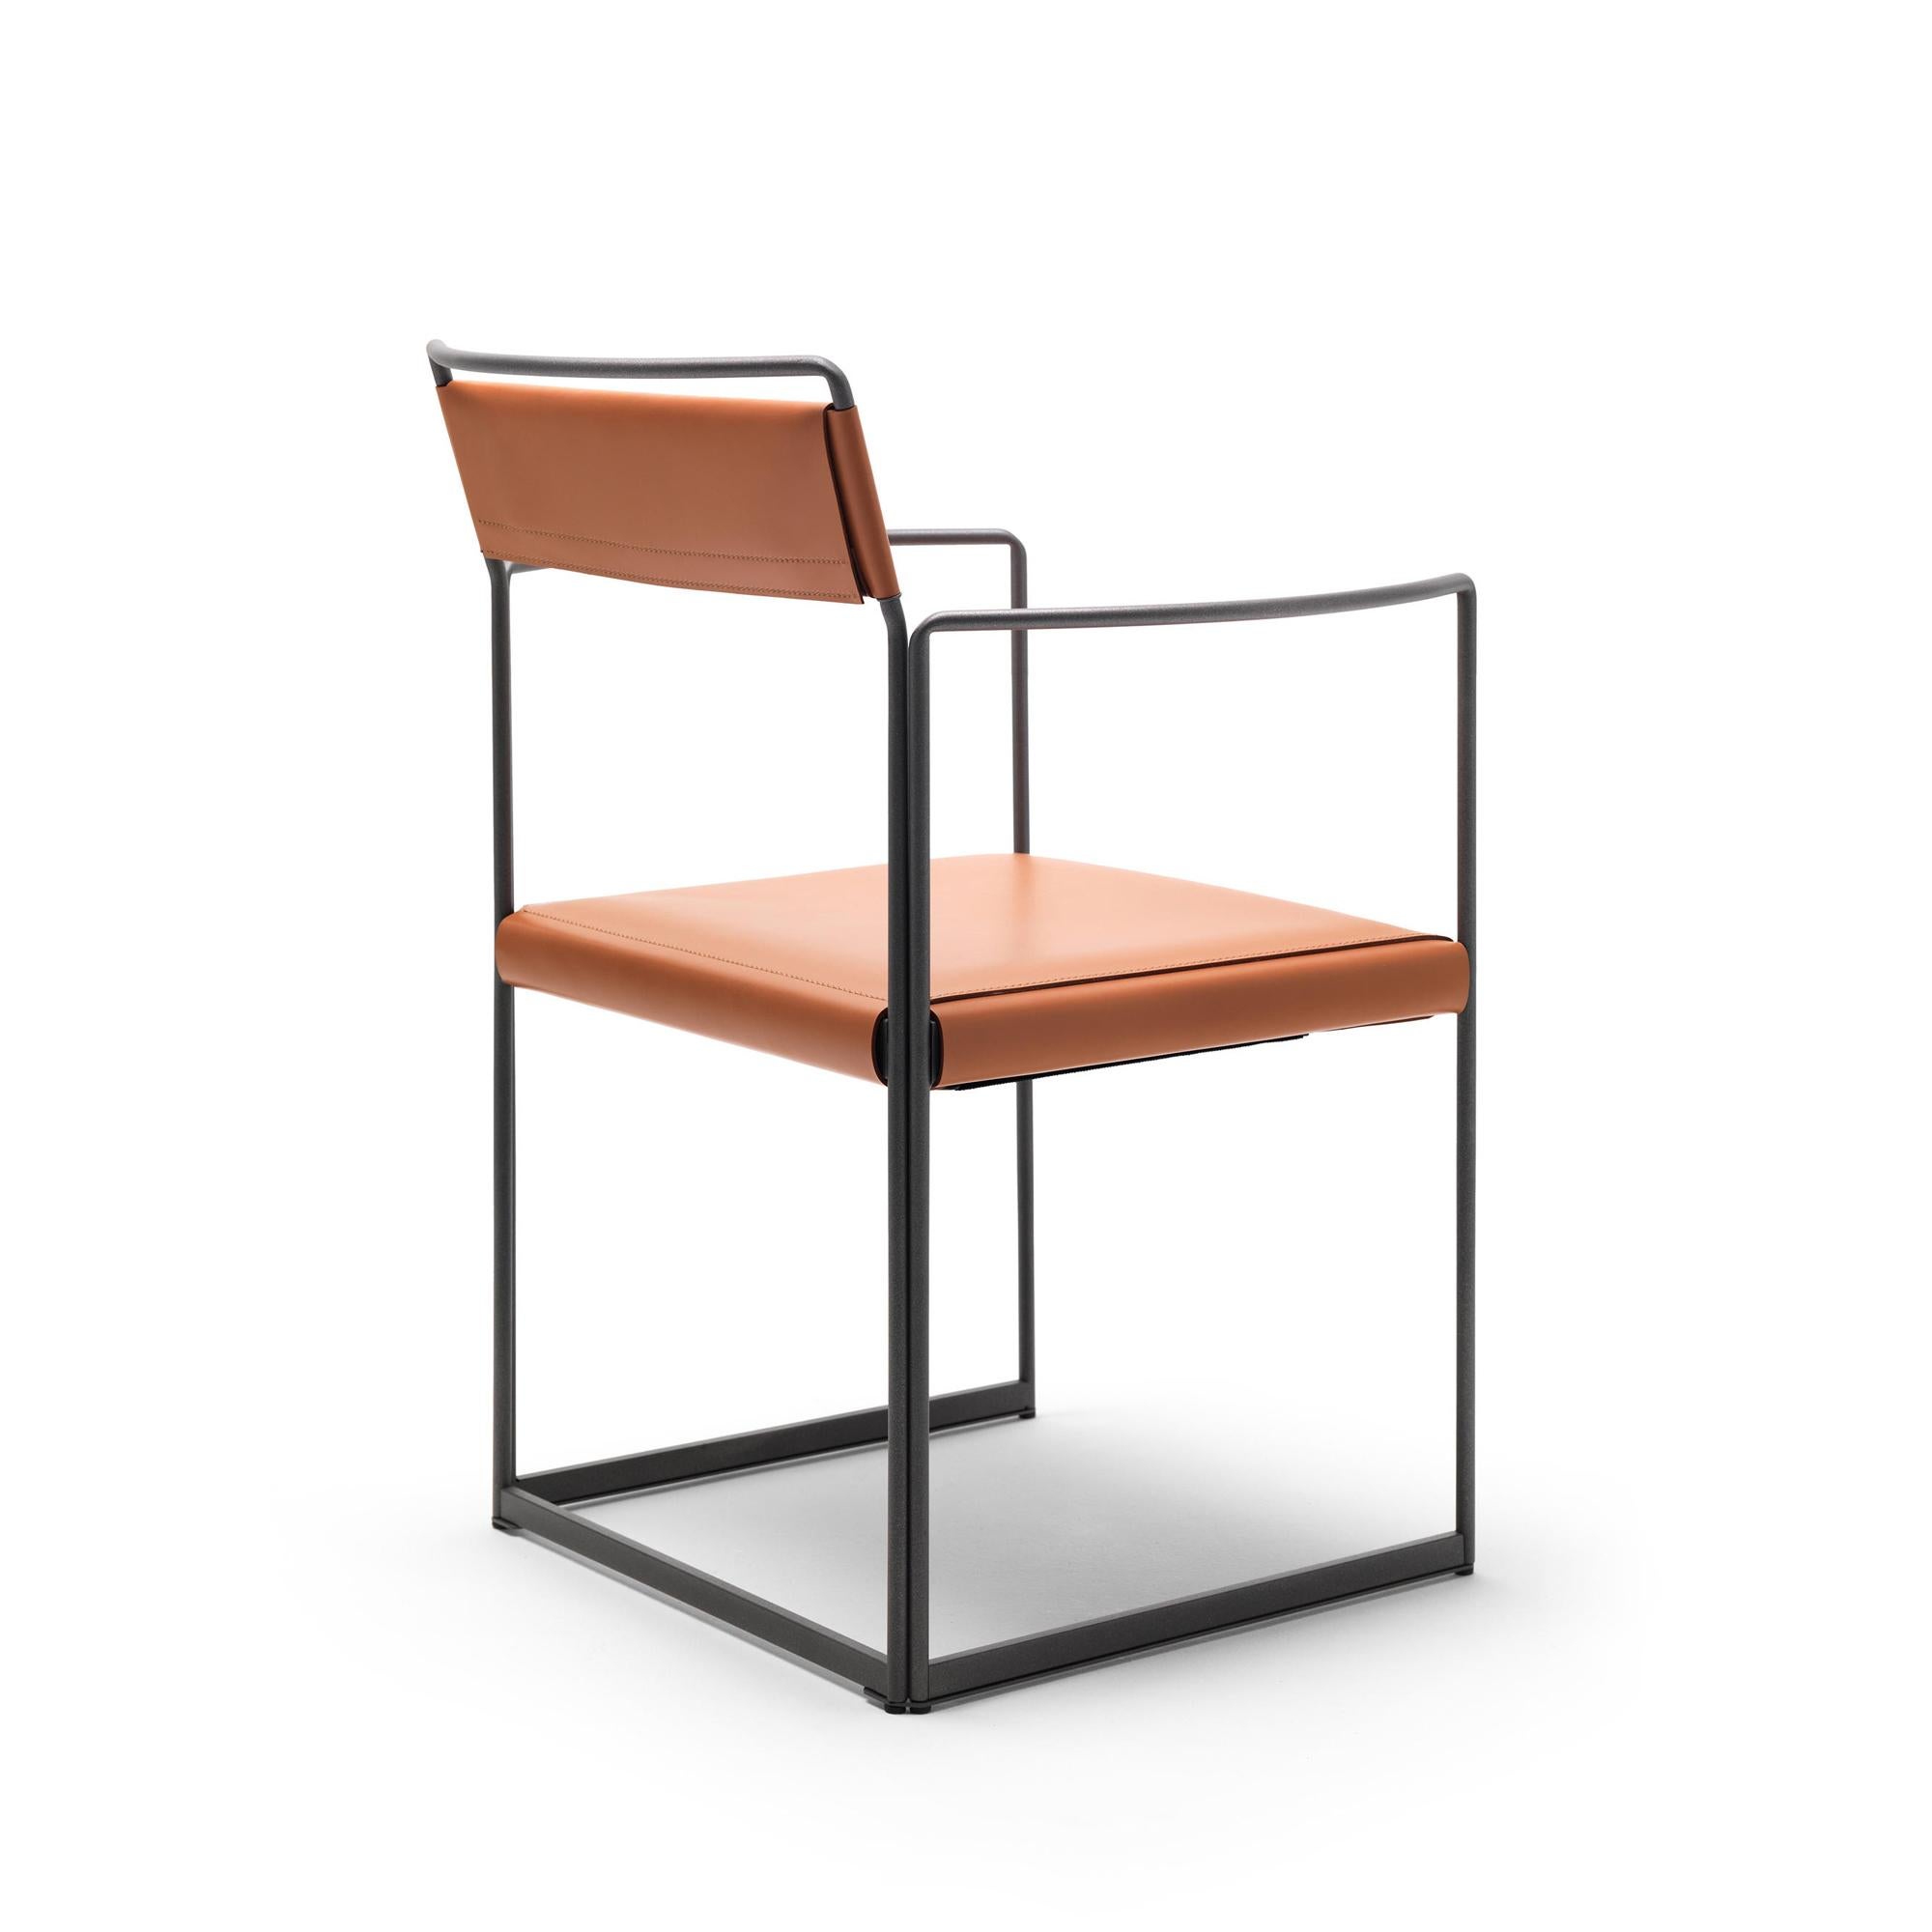 New Outline was developed by maximizing the integration of form and function while using minimum material. The steel rod frames define a contour that is slender and light, becoming armrests and backrest as a simple and fluid line. The fully